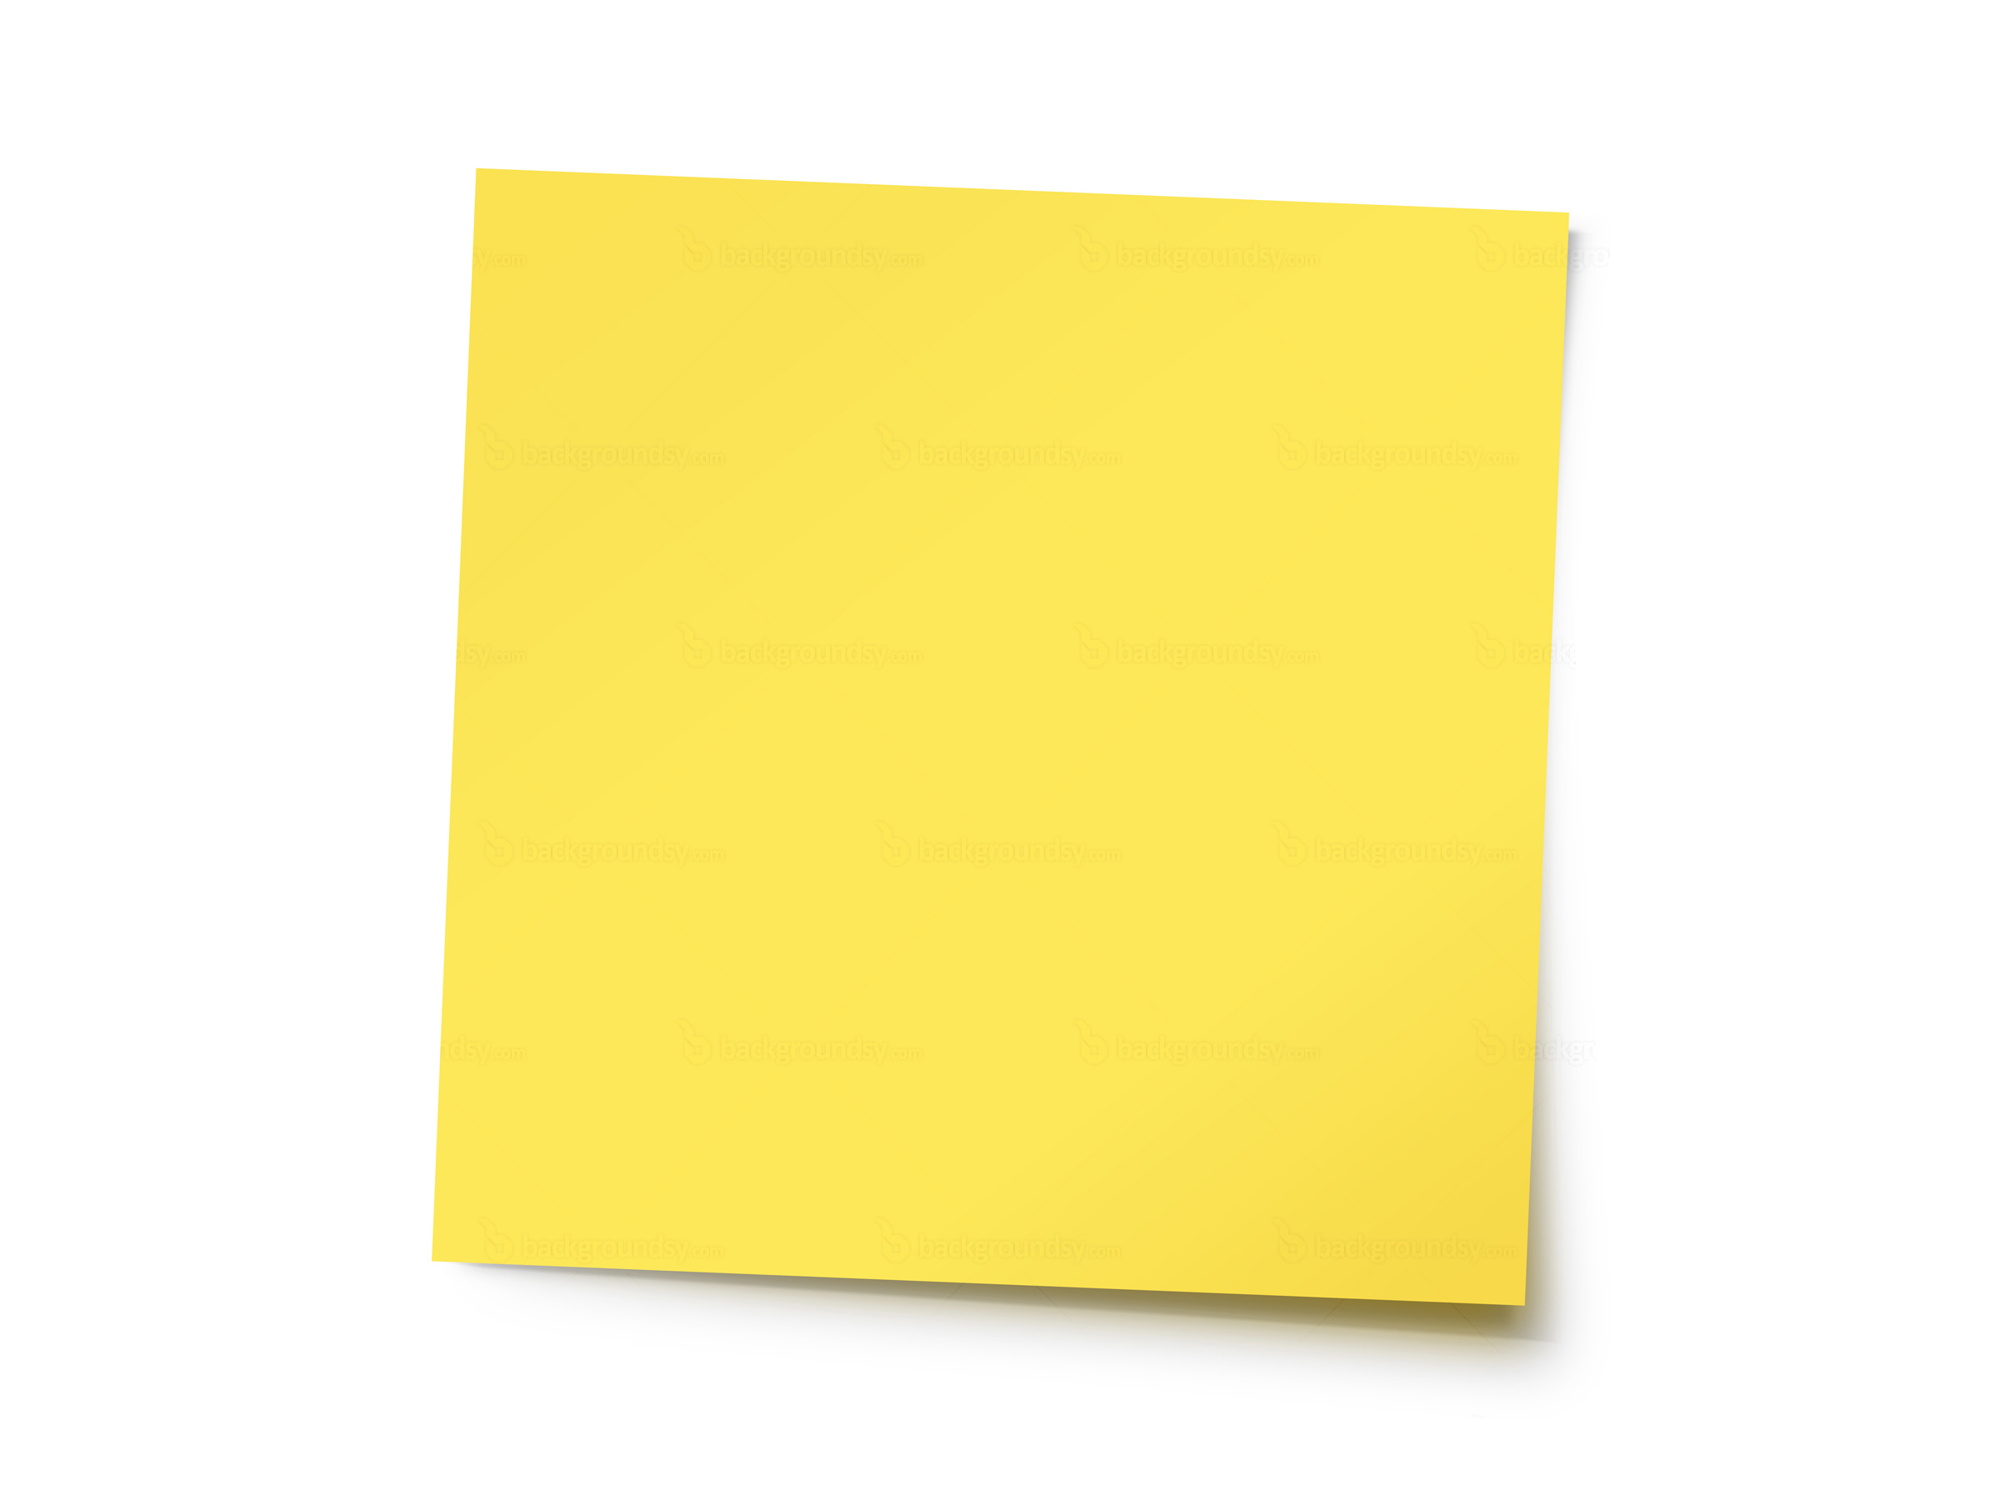 size of post it notes